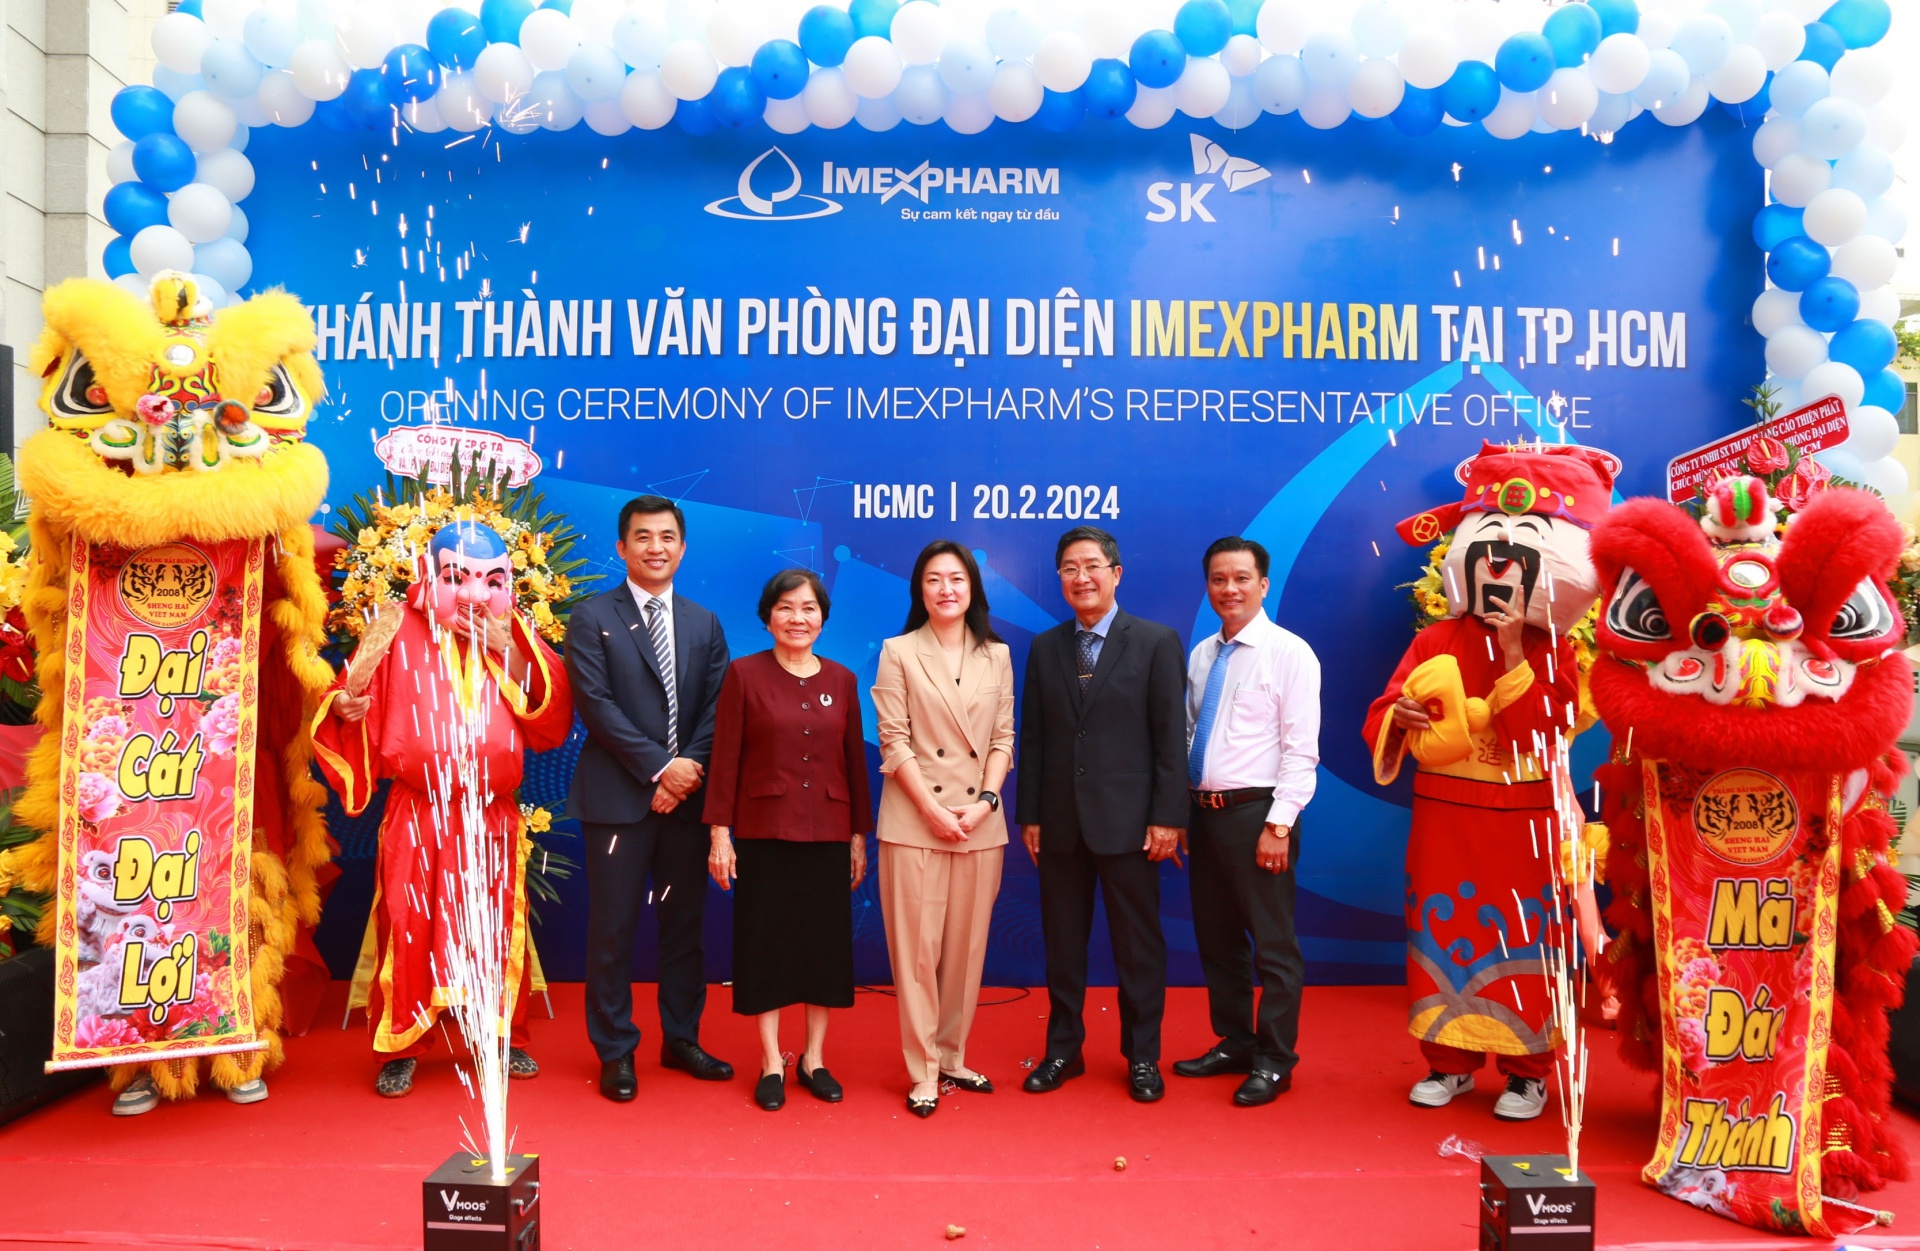 Imexpharm opens new representative office in Ho Chi Minh City